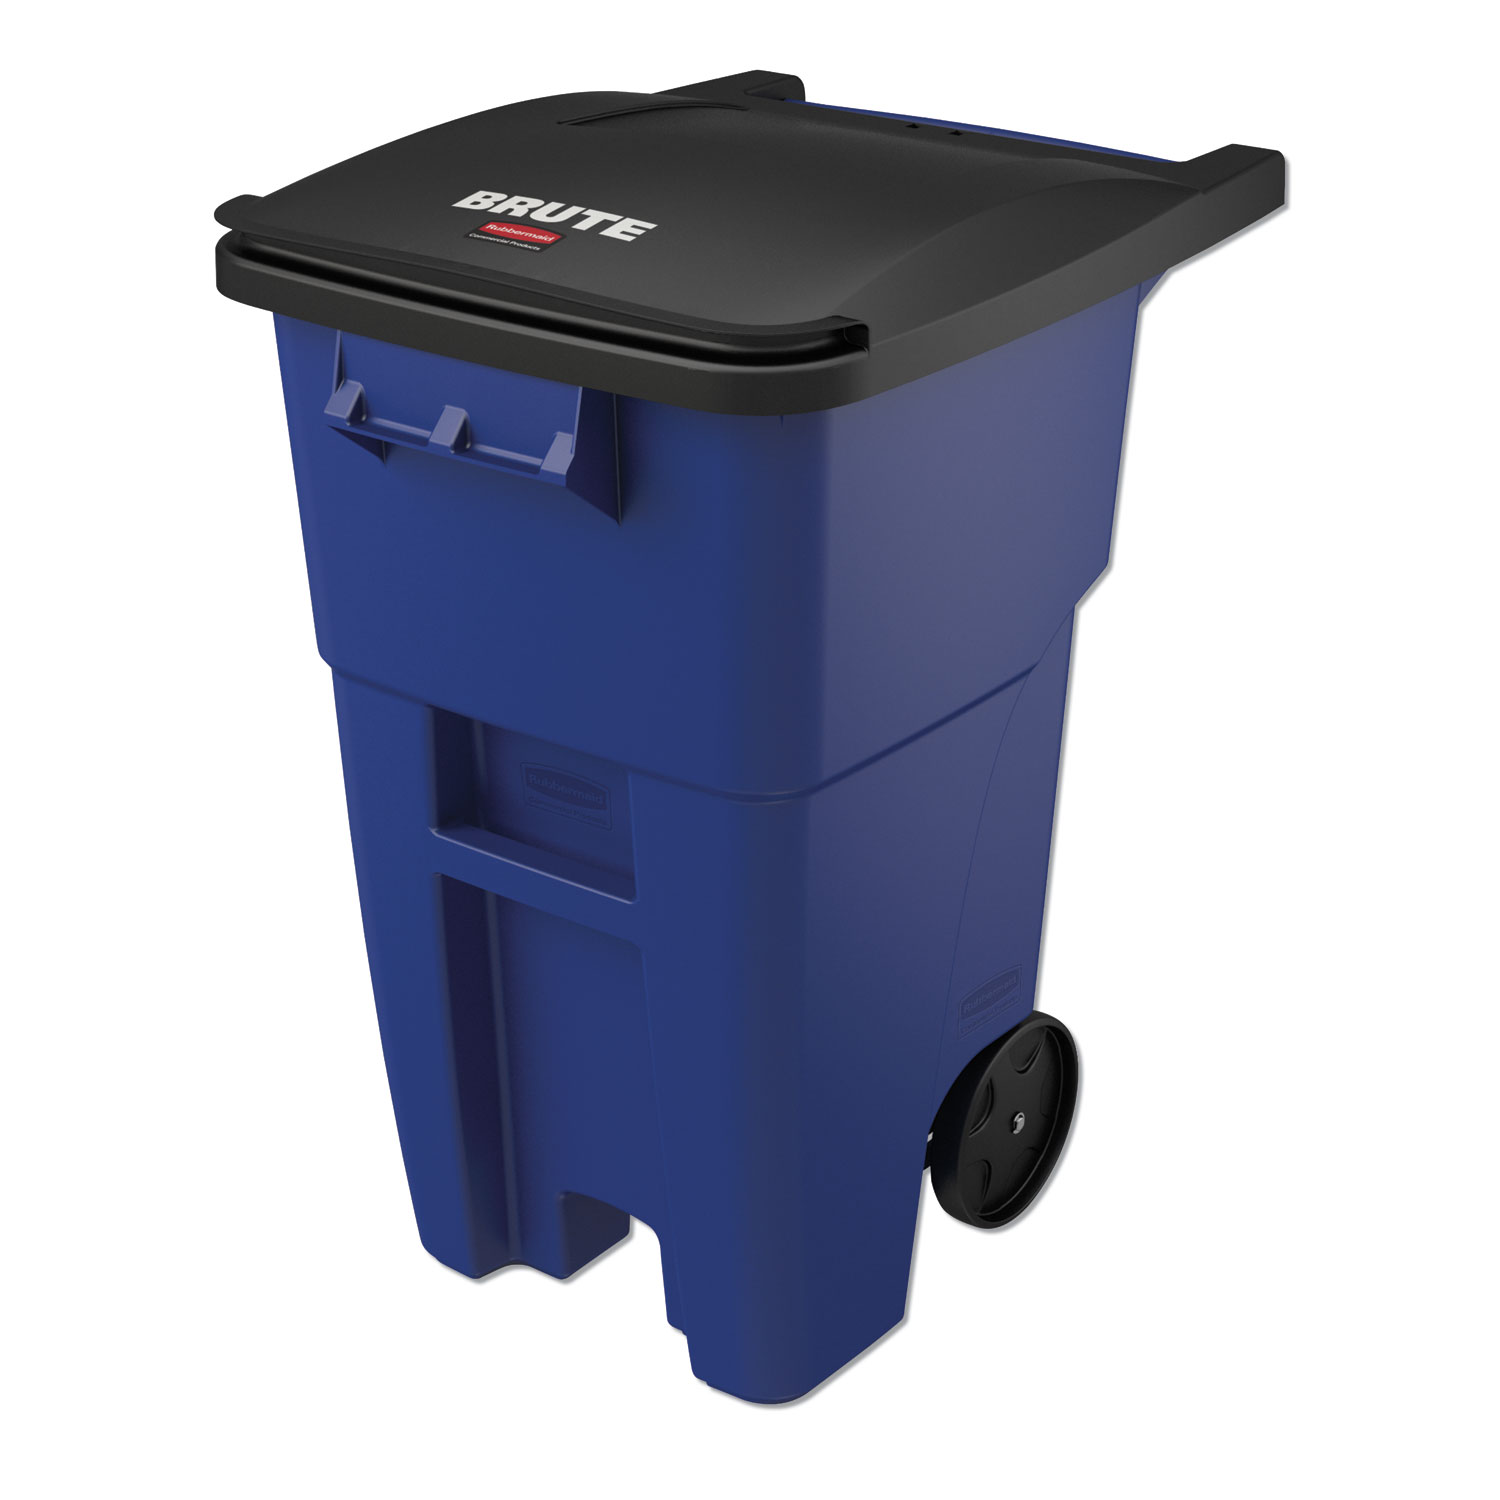  Rubbermaid Commercial 9W2700BLUE Brute Rollout Container, Square, Plastic, 50 gal, Blue (RCP9W27BLU) 